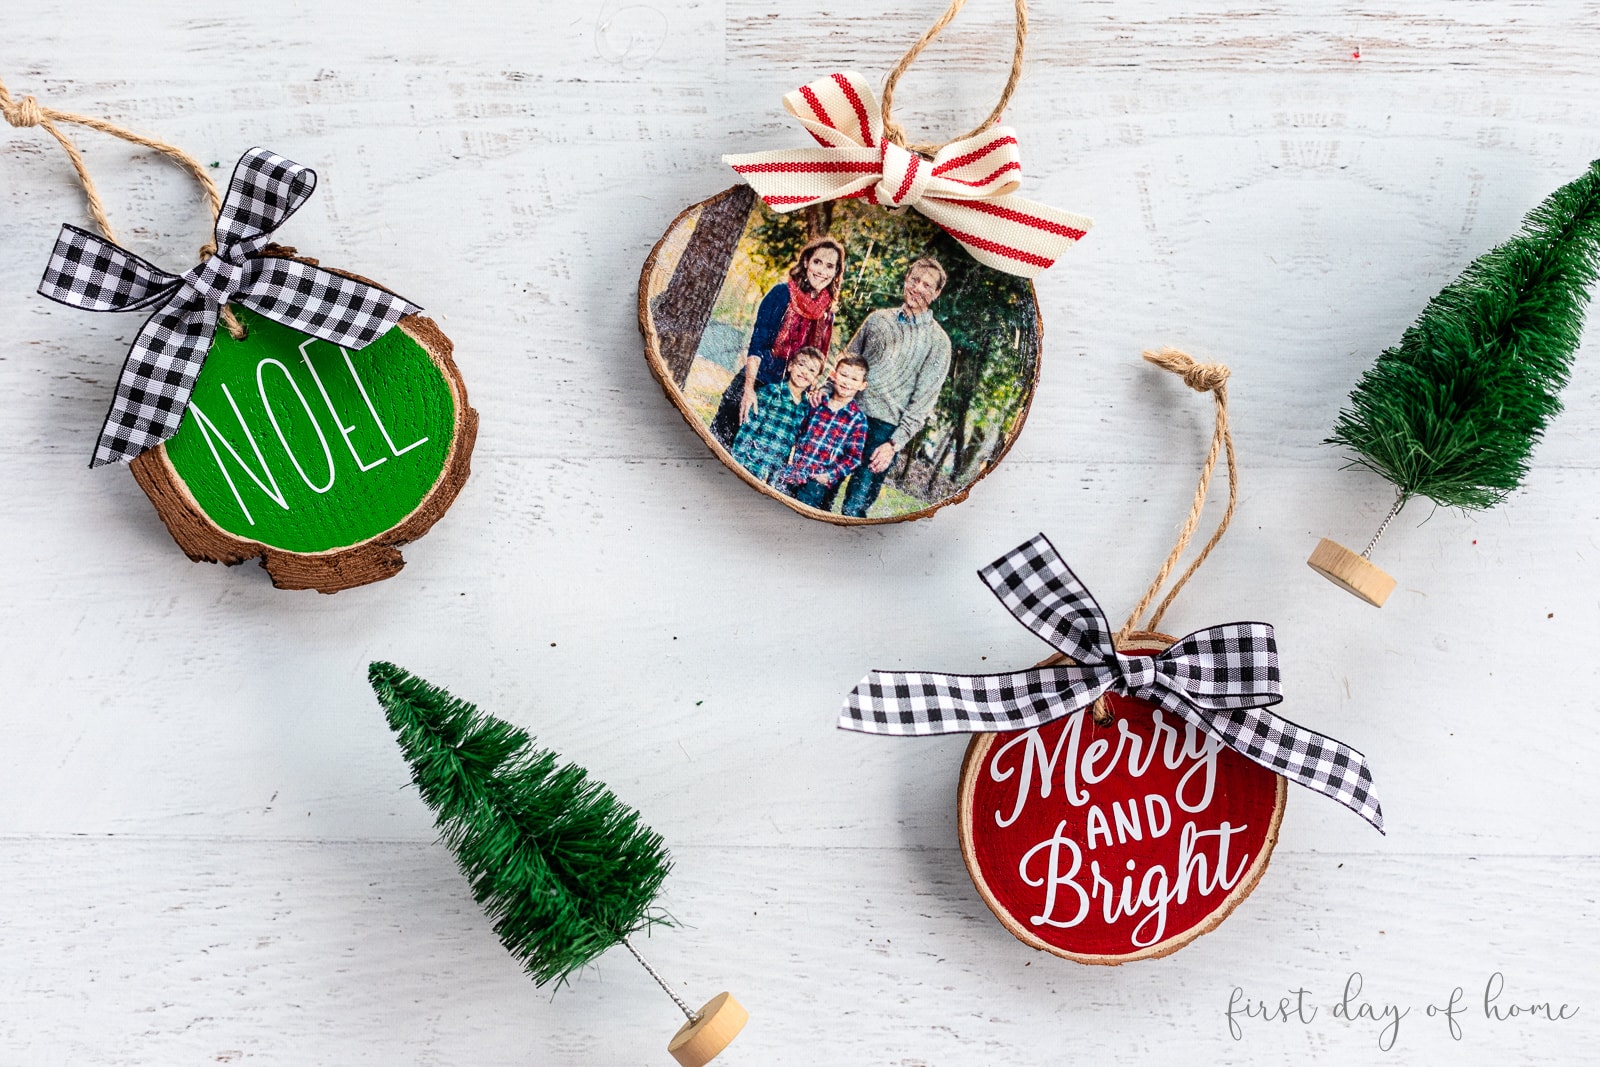 Wooden ornaments painted with vinyl lettering and with photo image transfer